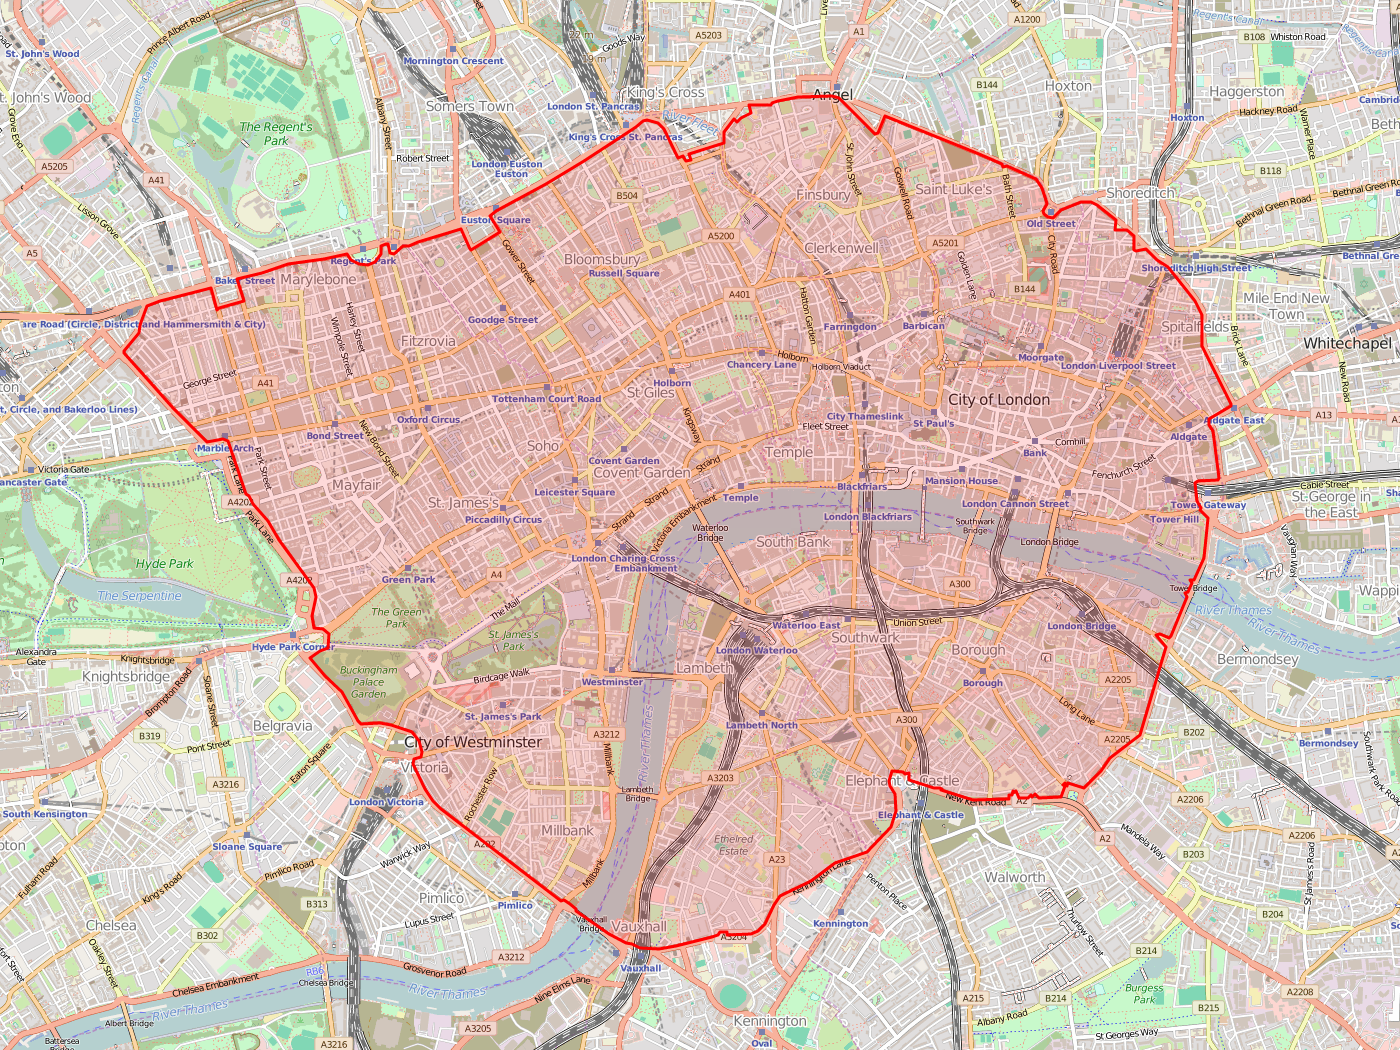 A map of London showing the areas where the congestion charge applies